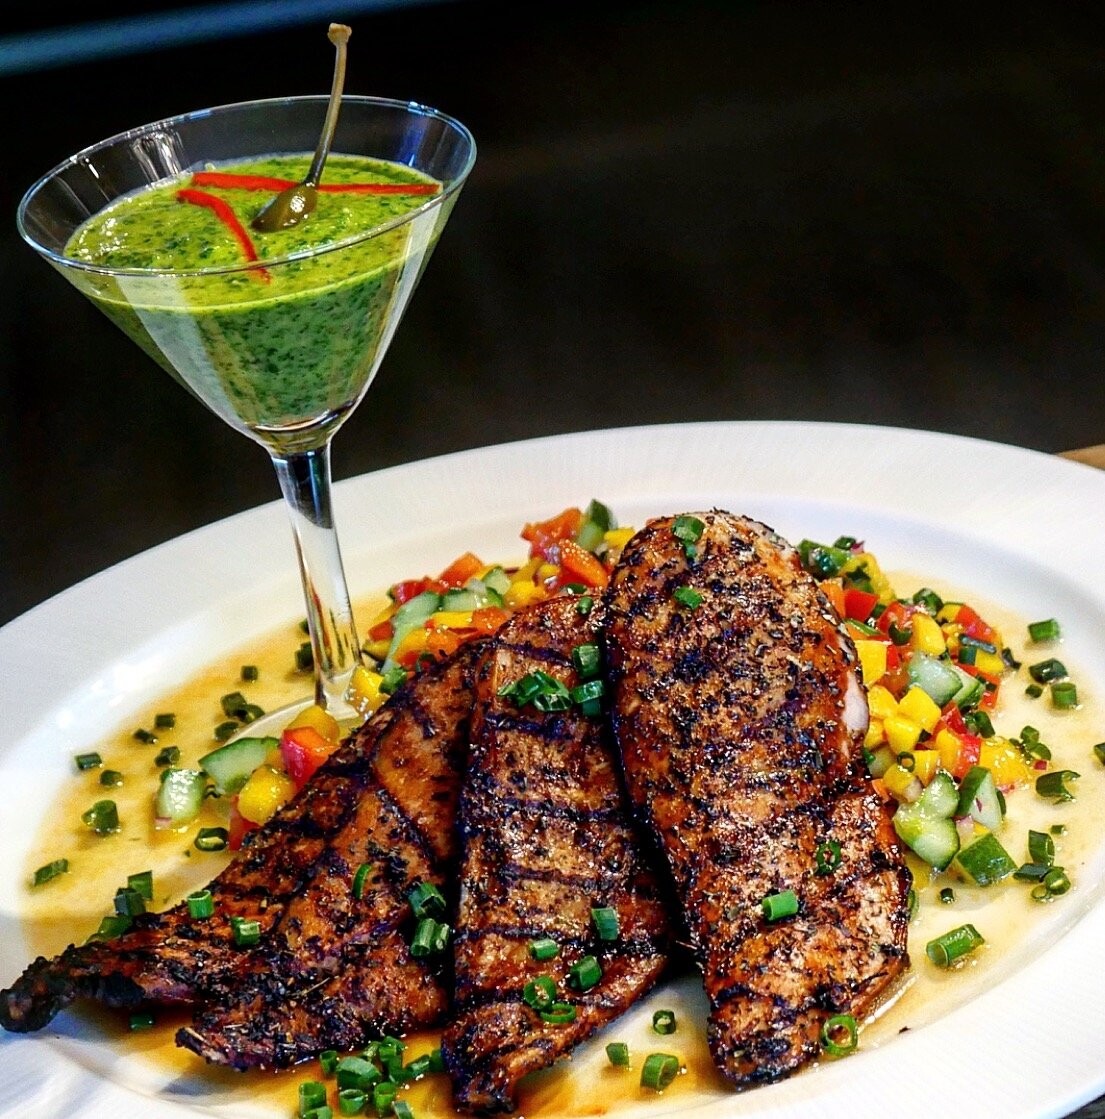 Parsley Martini along with grilled thinly sliced chicken breast and mango salsa.